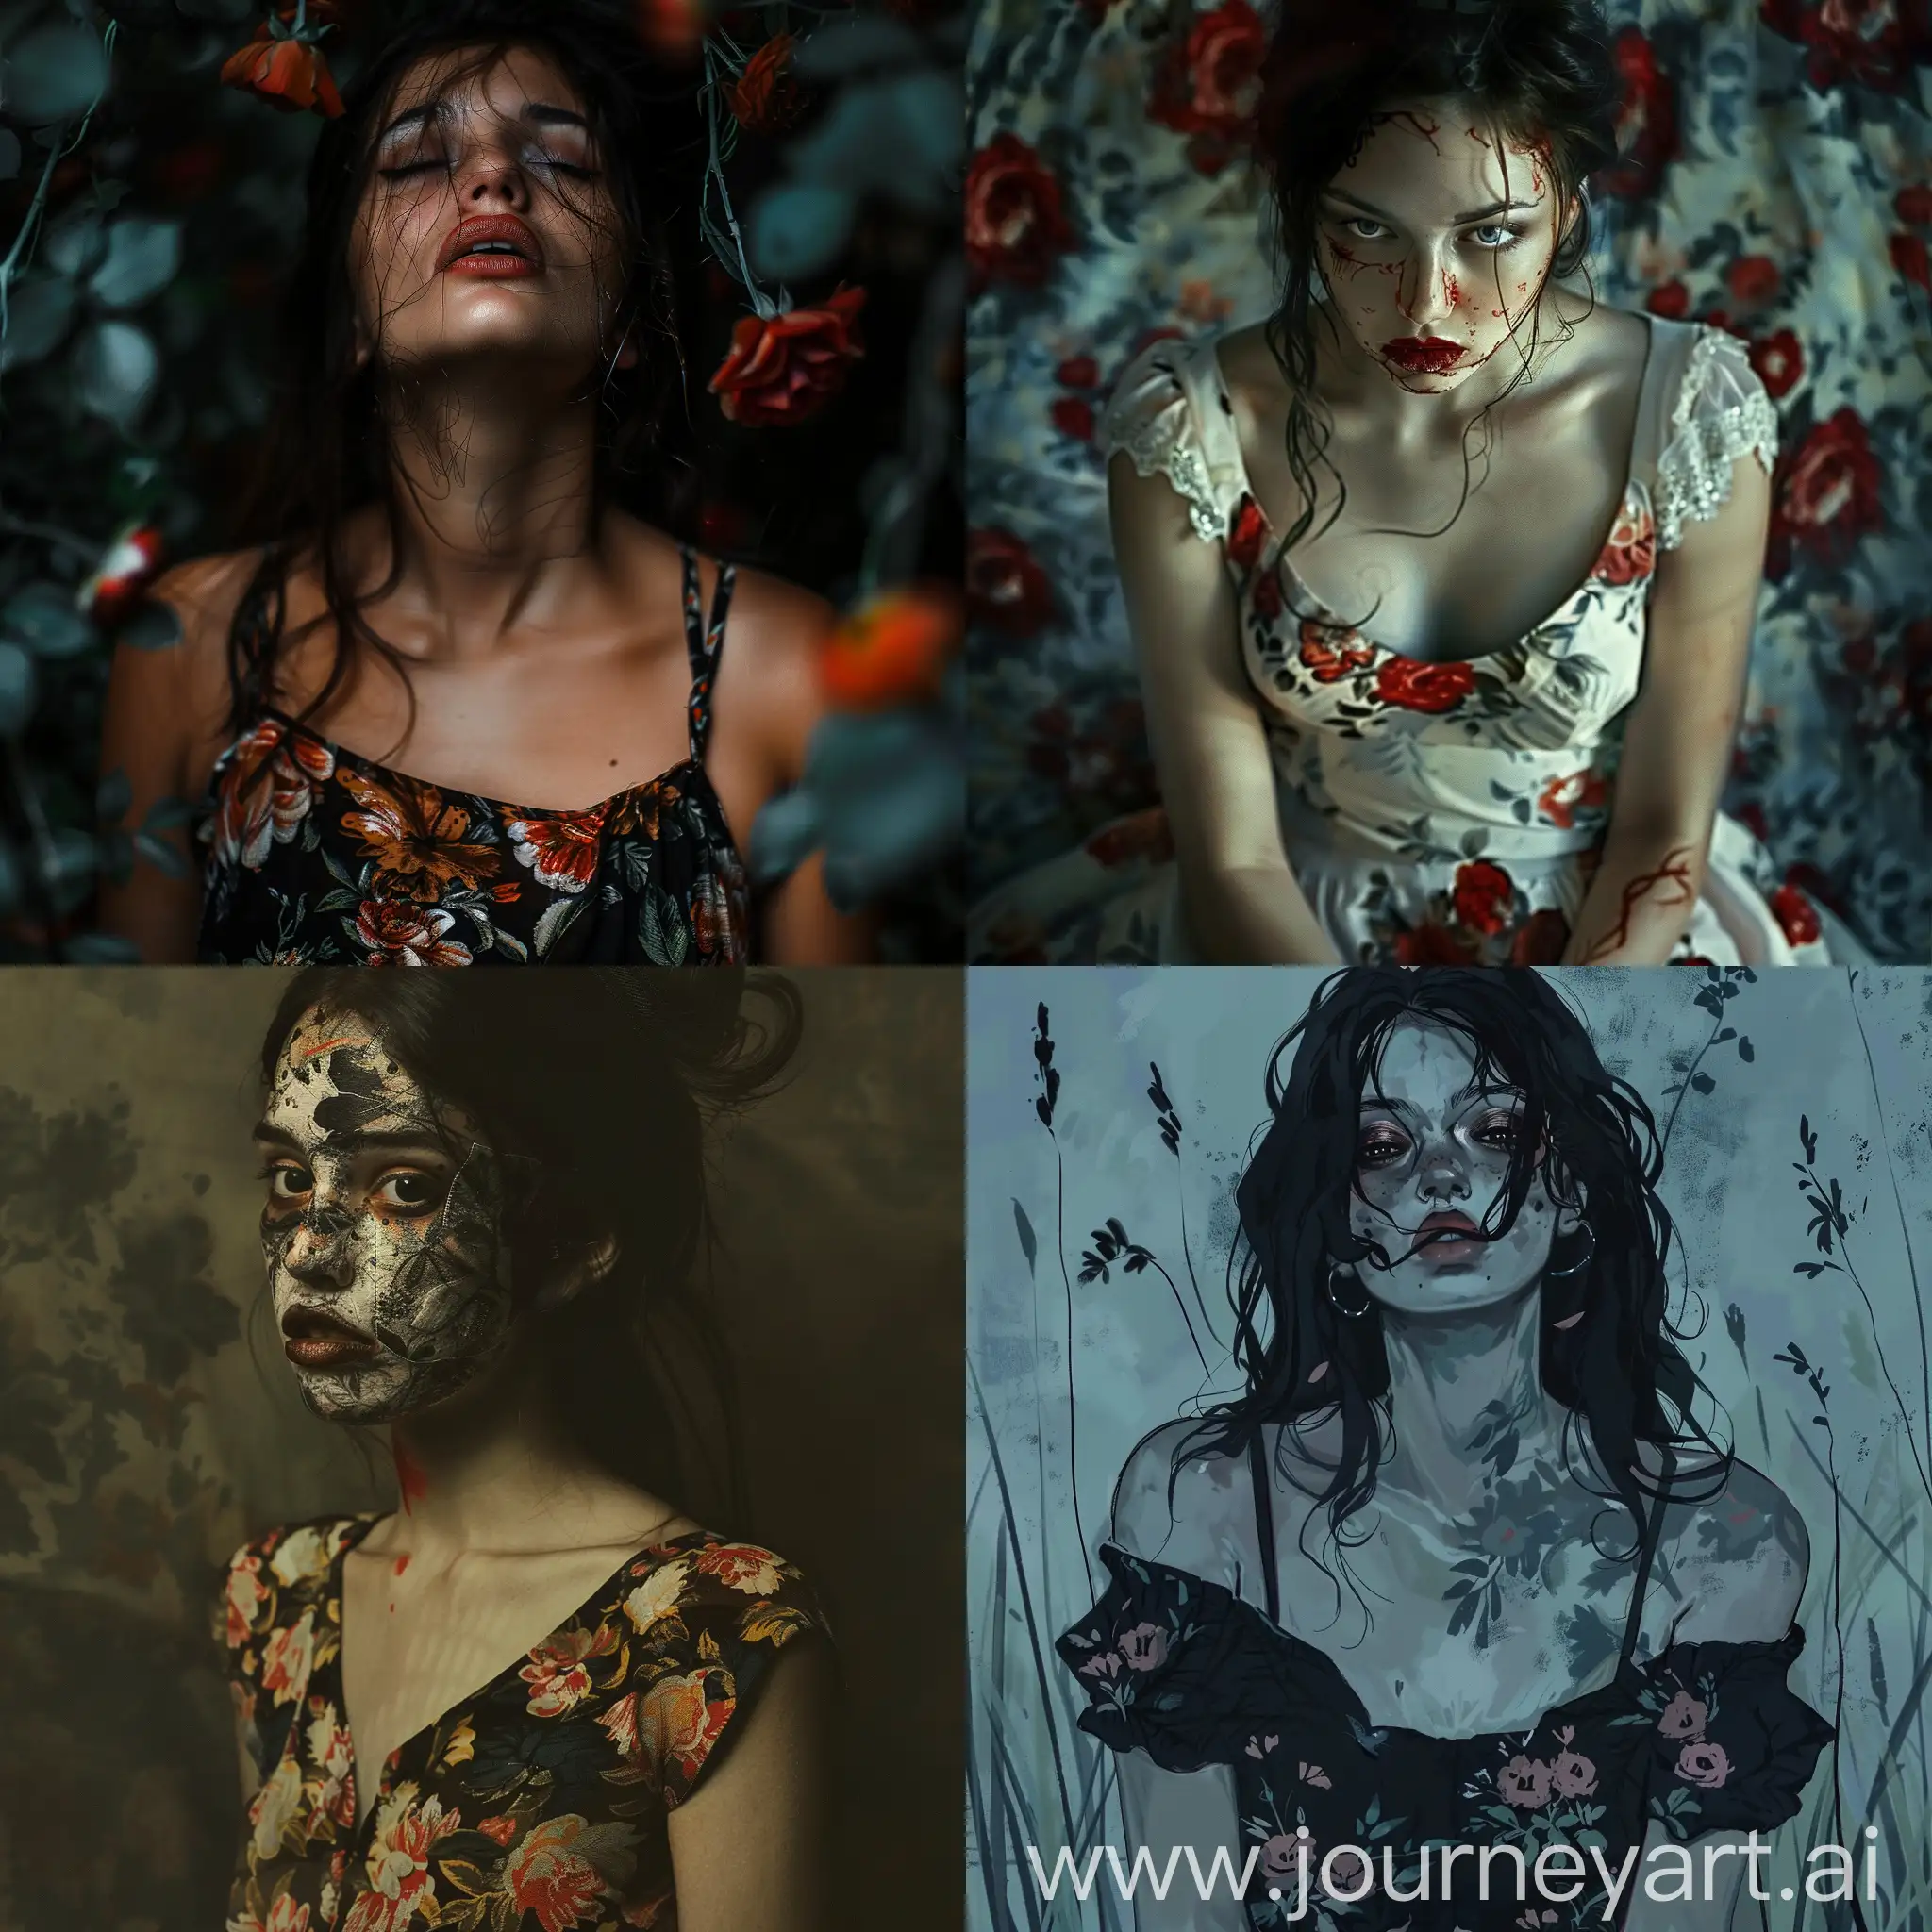 Scary-Girl-with-Floral-Dress-in-Mysterious-Atmosphere